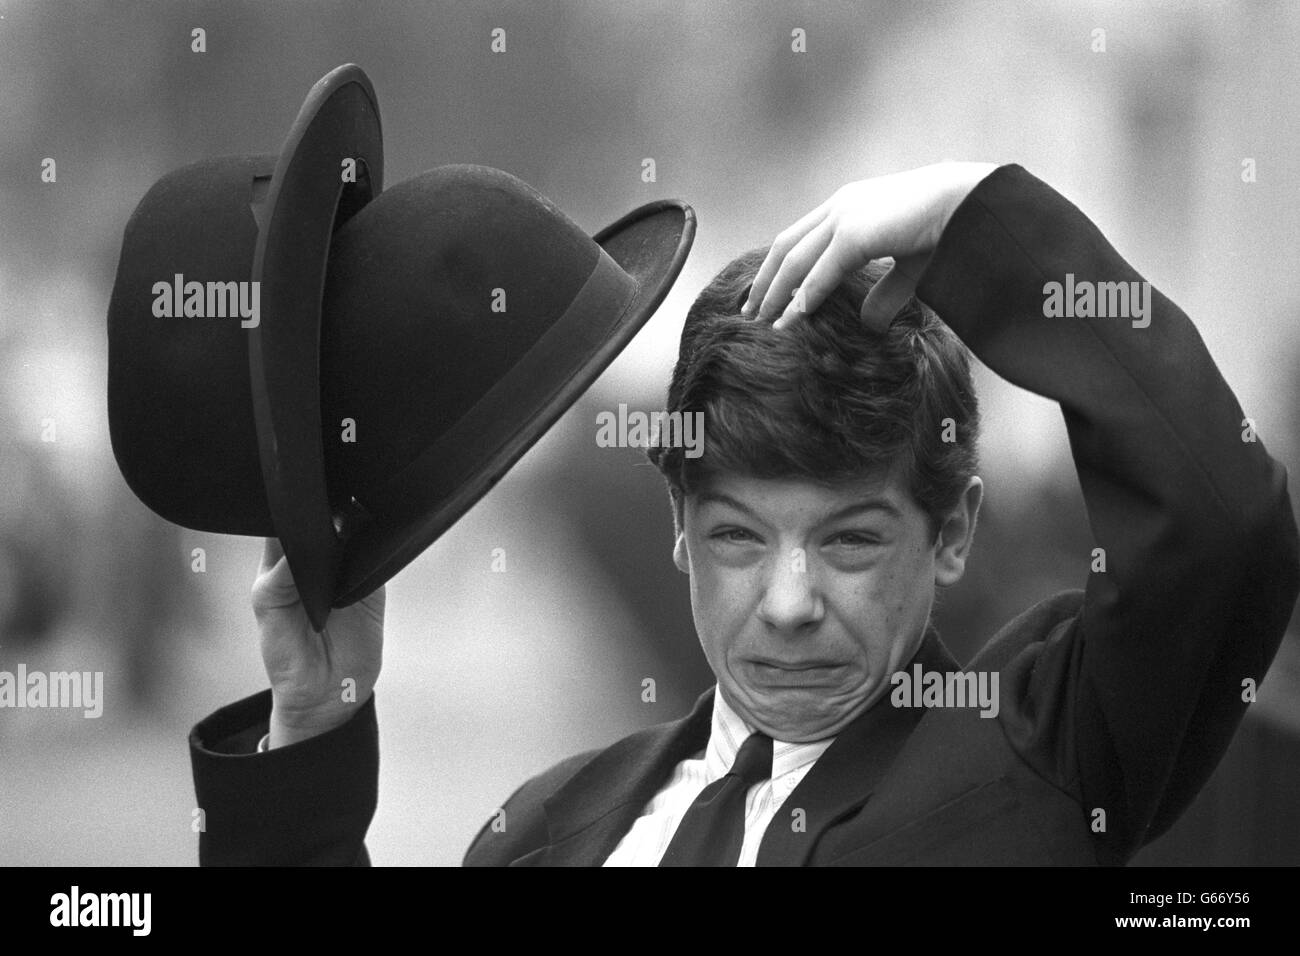 David Bartlett, 15, models the original bowler hats worn by comedy duo Laurel and Hardy, which are due to be auctioned at Christie's. David is the youngest member of the official Laurel and Hardy Appreciaition Society. Stock Photo